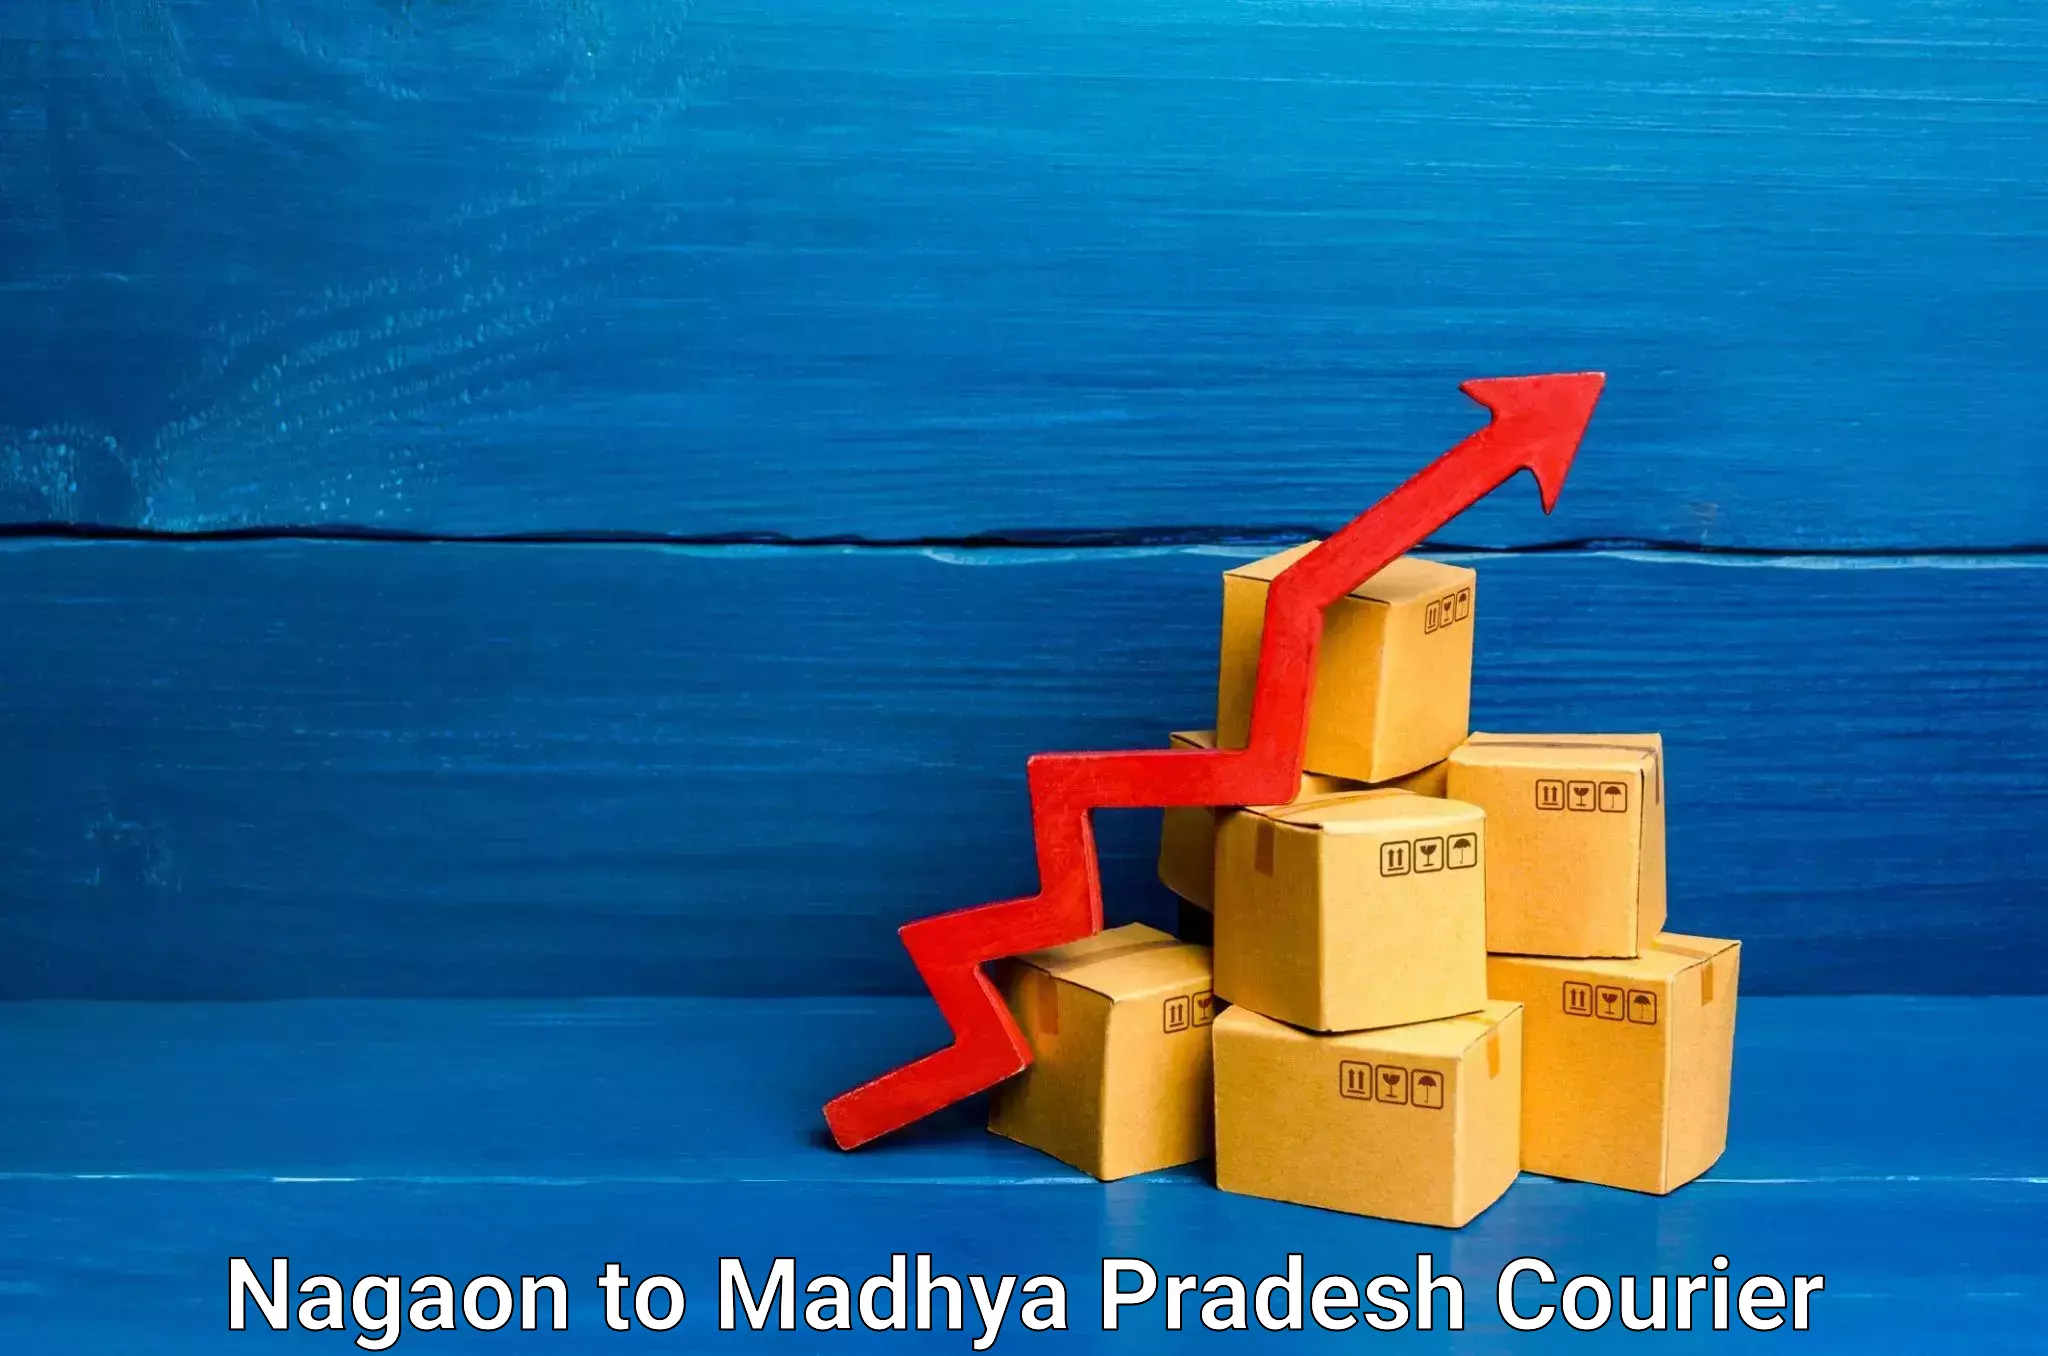 Global courier networks Nagaon to Sheopur